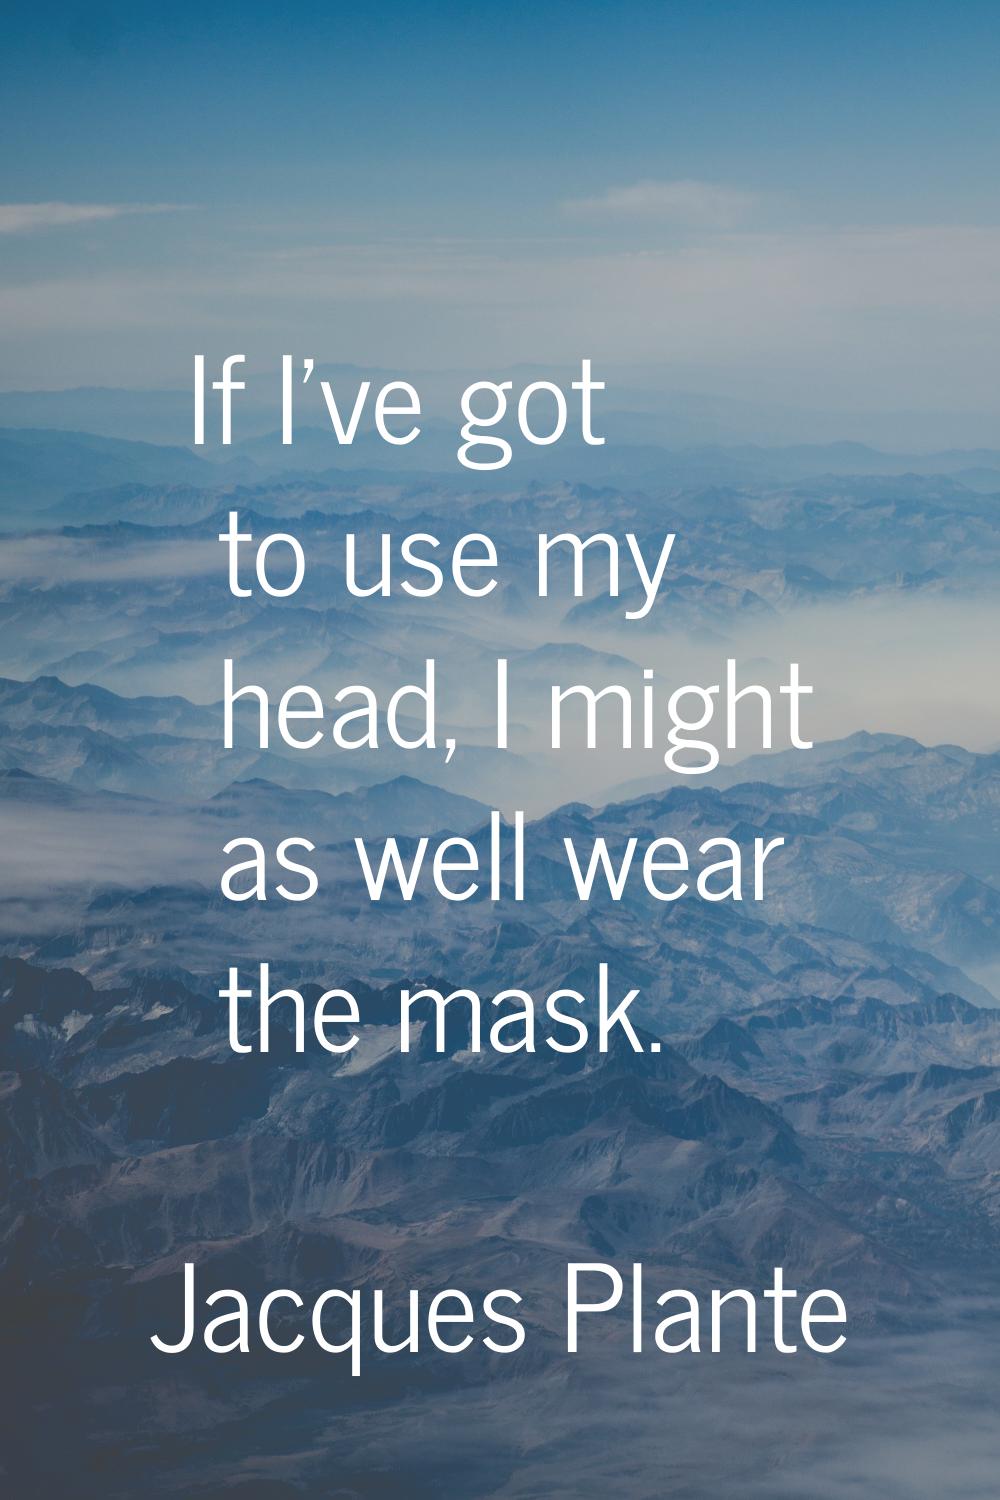 If I've got to use my head, I might as well wear the mask.